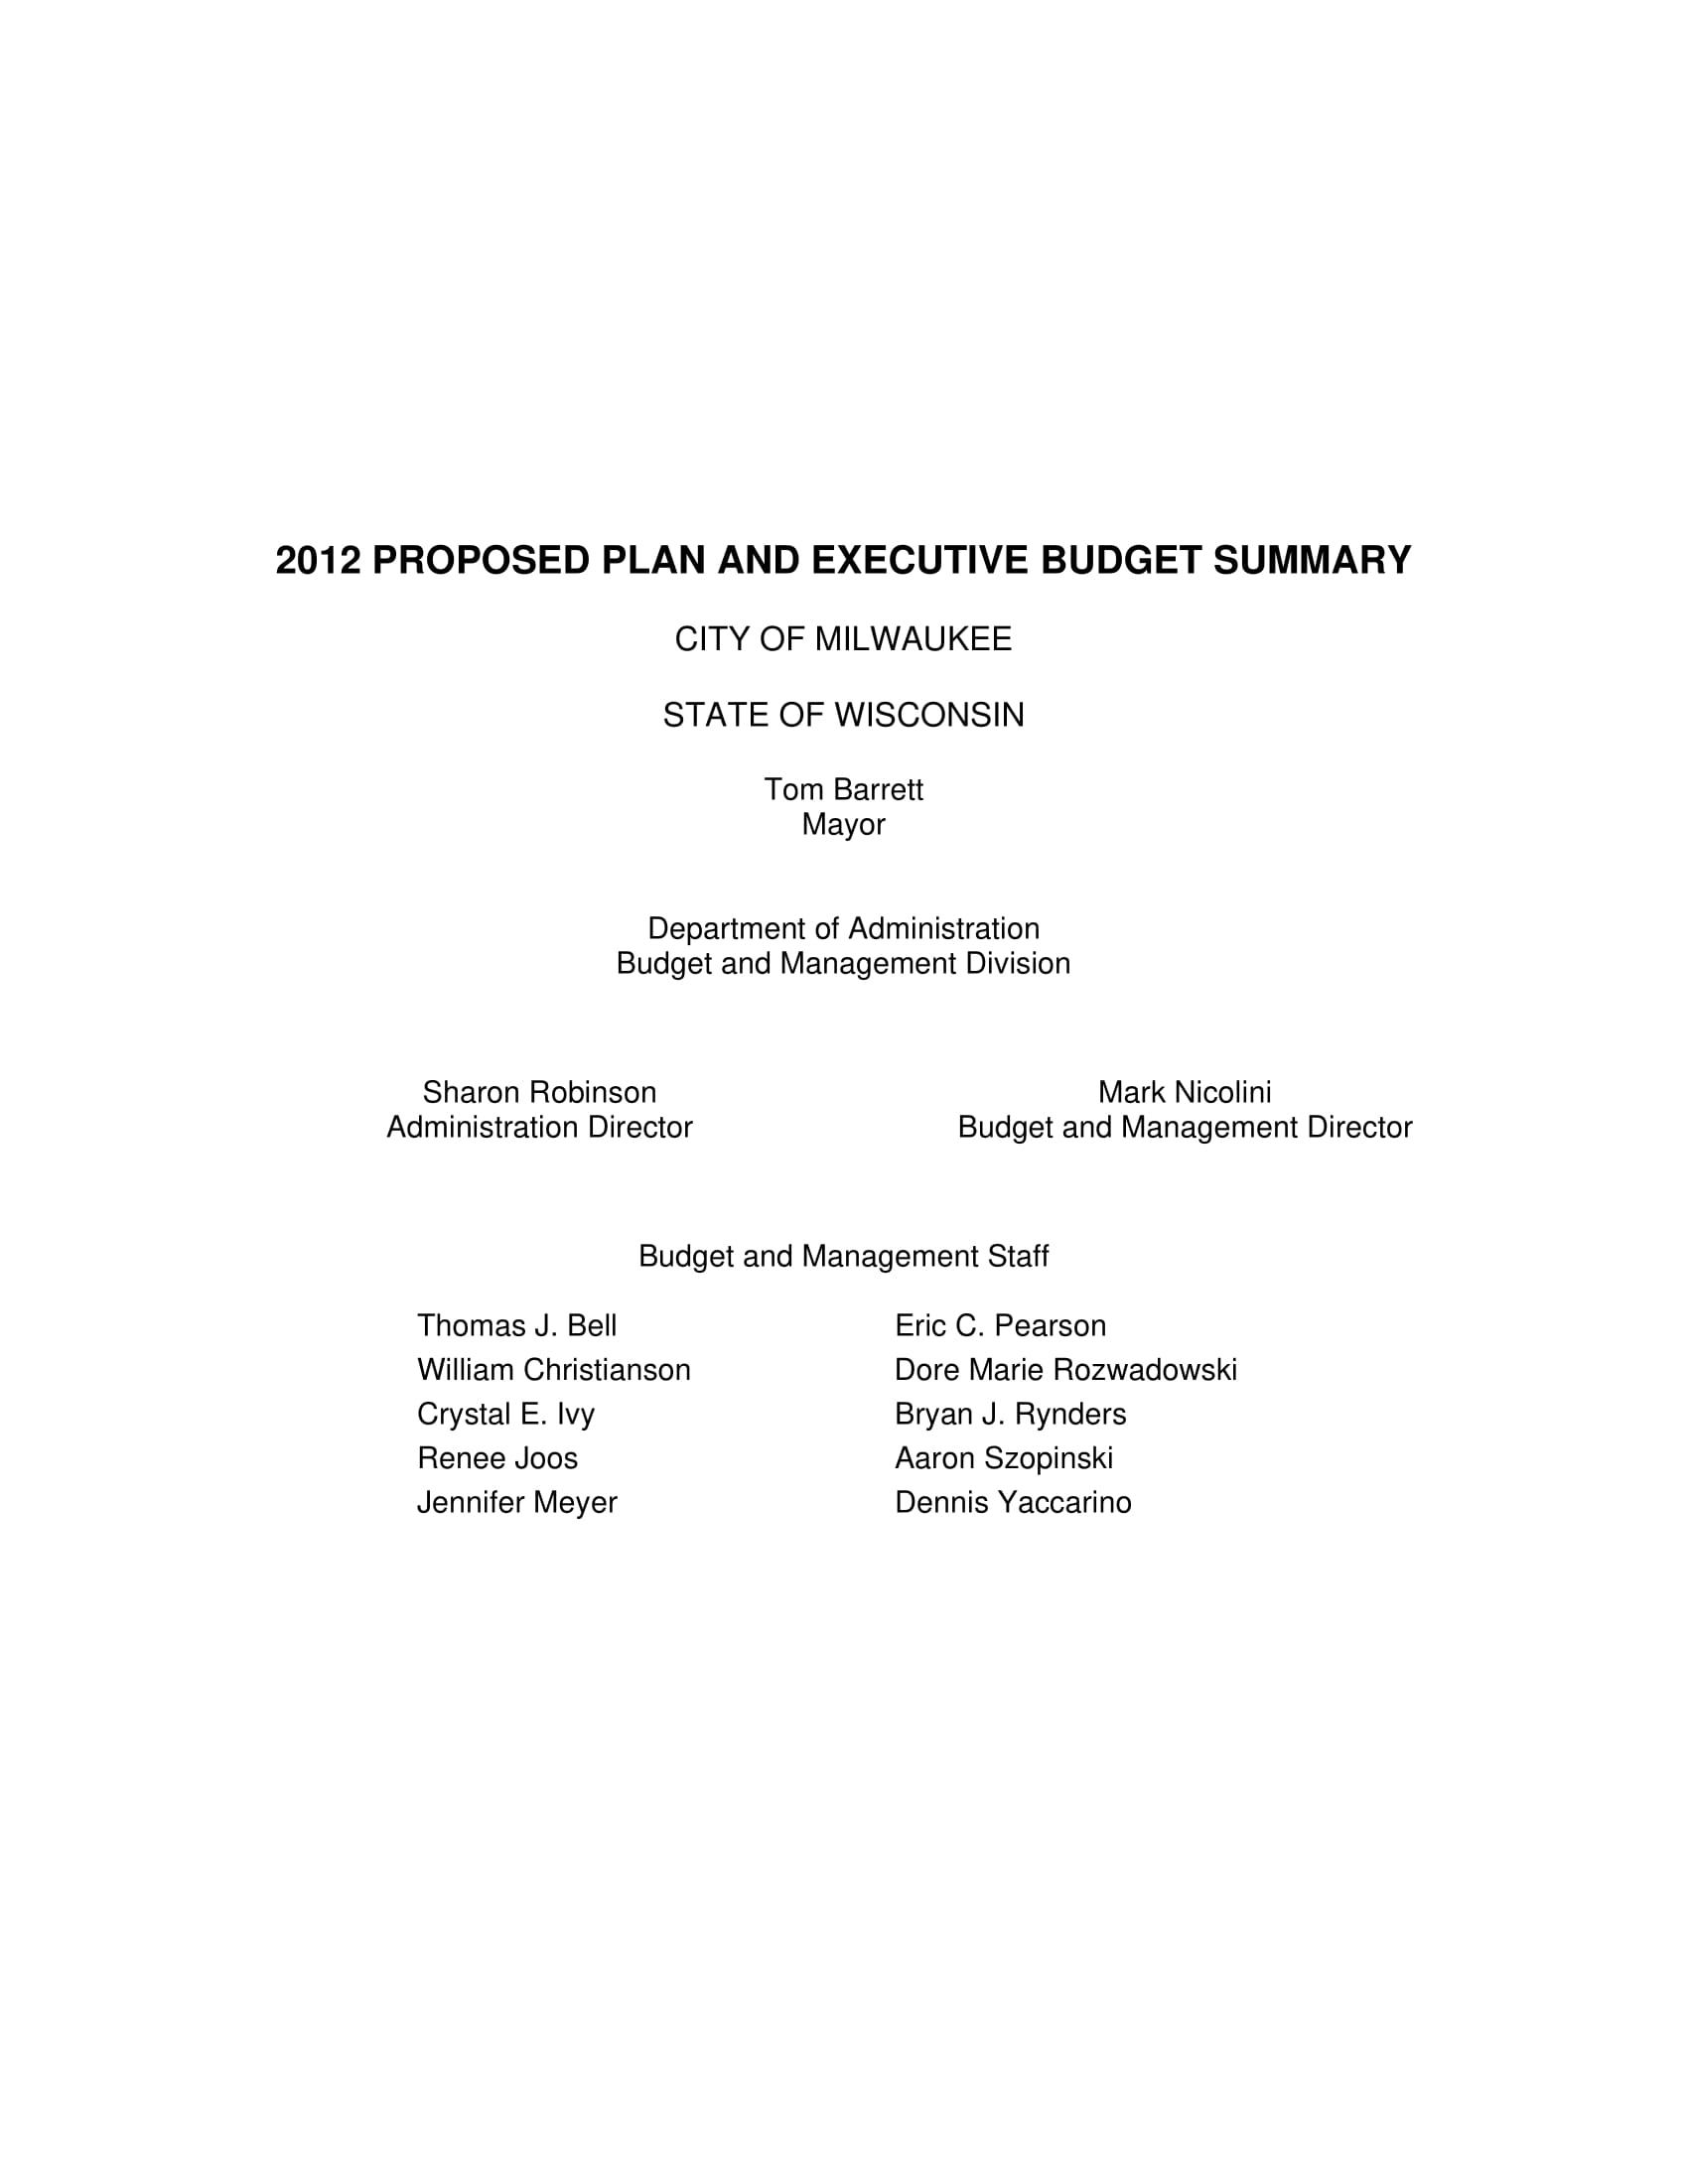 proposed plan and executive budget summary example 001